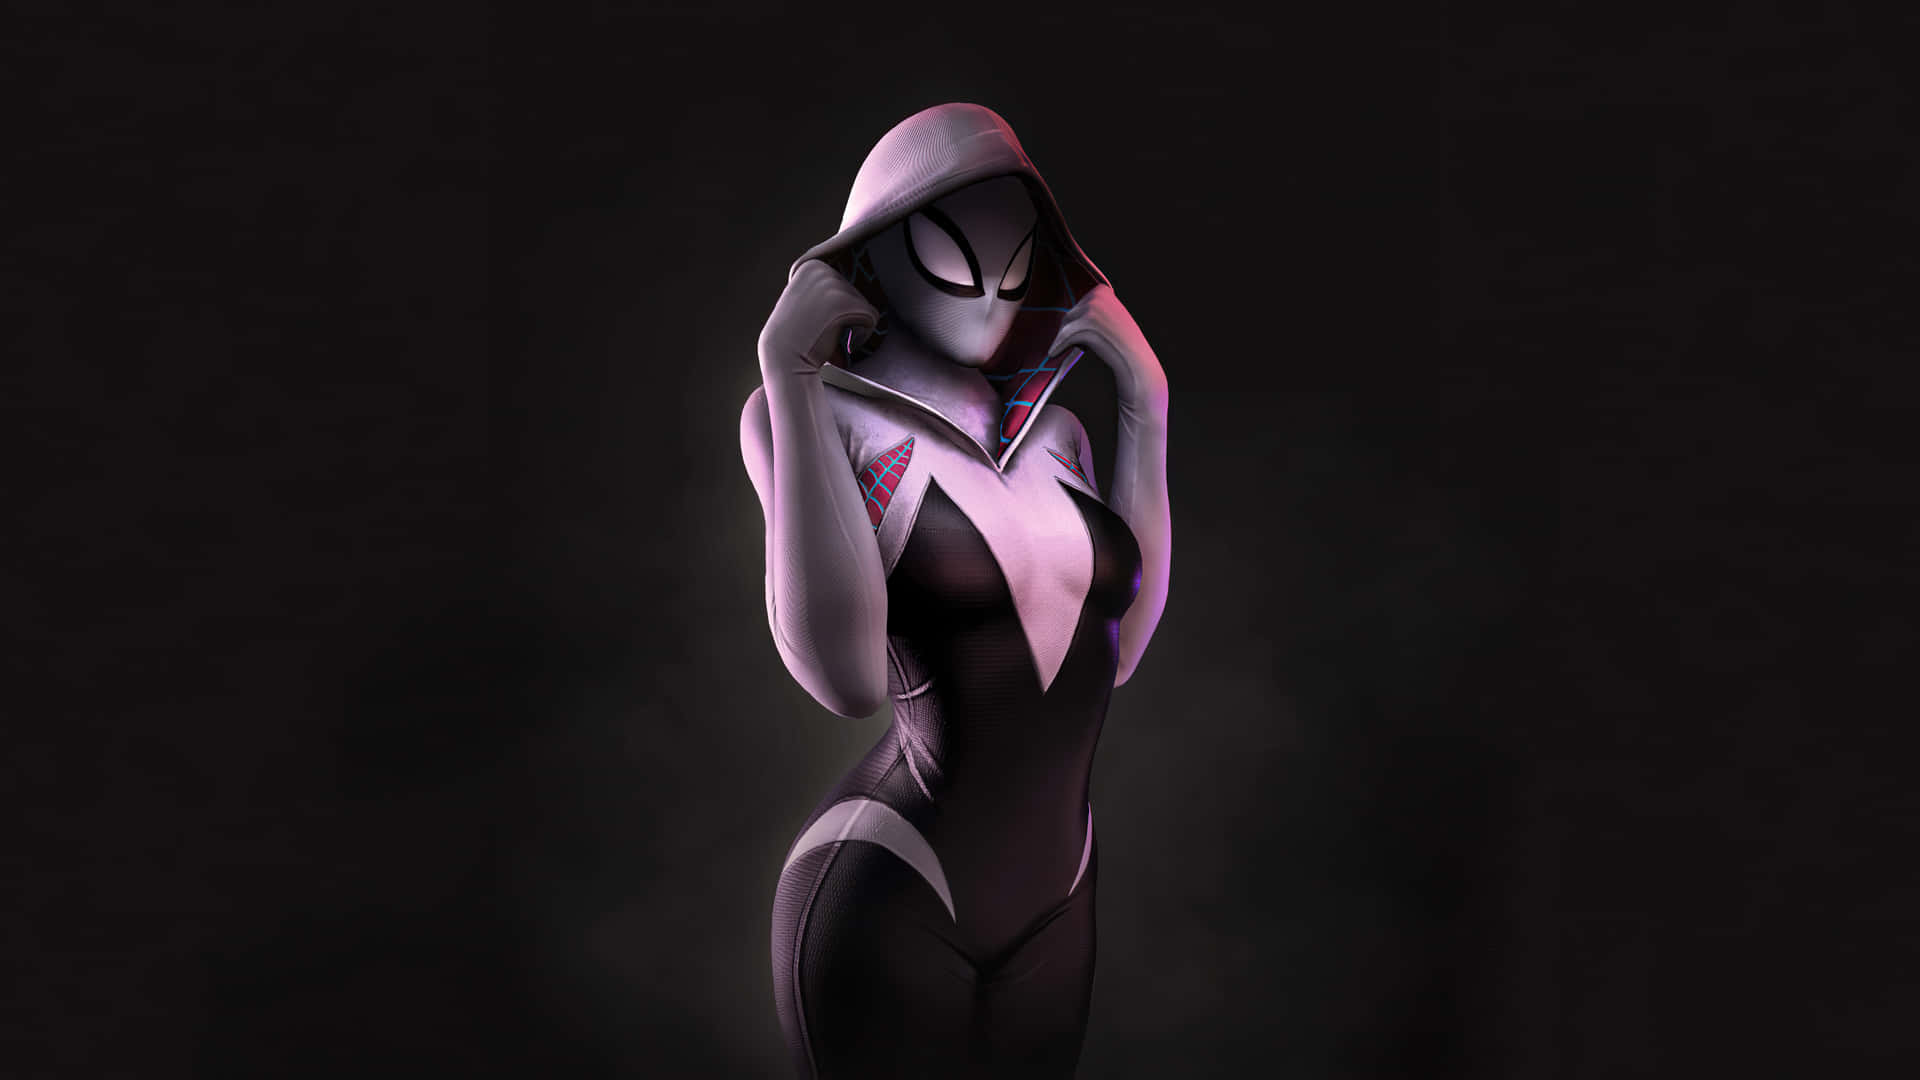 Spider Gwen Uses Her Powerful Abilities To Fight Crime